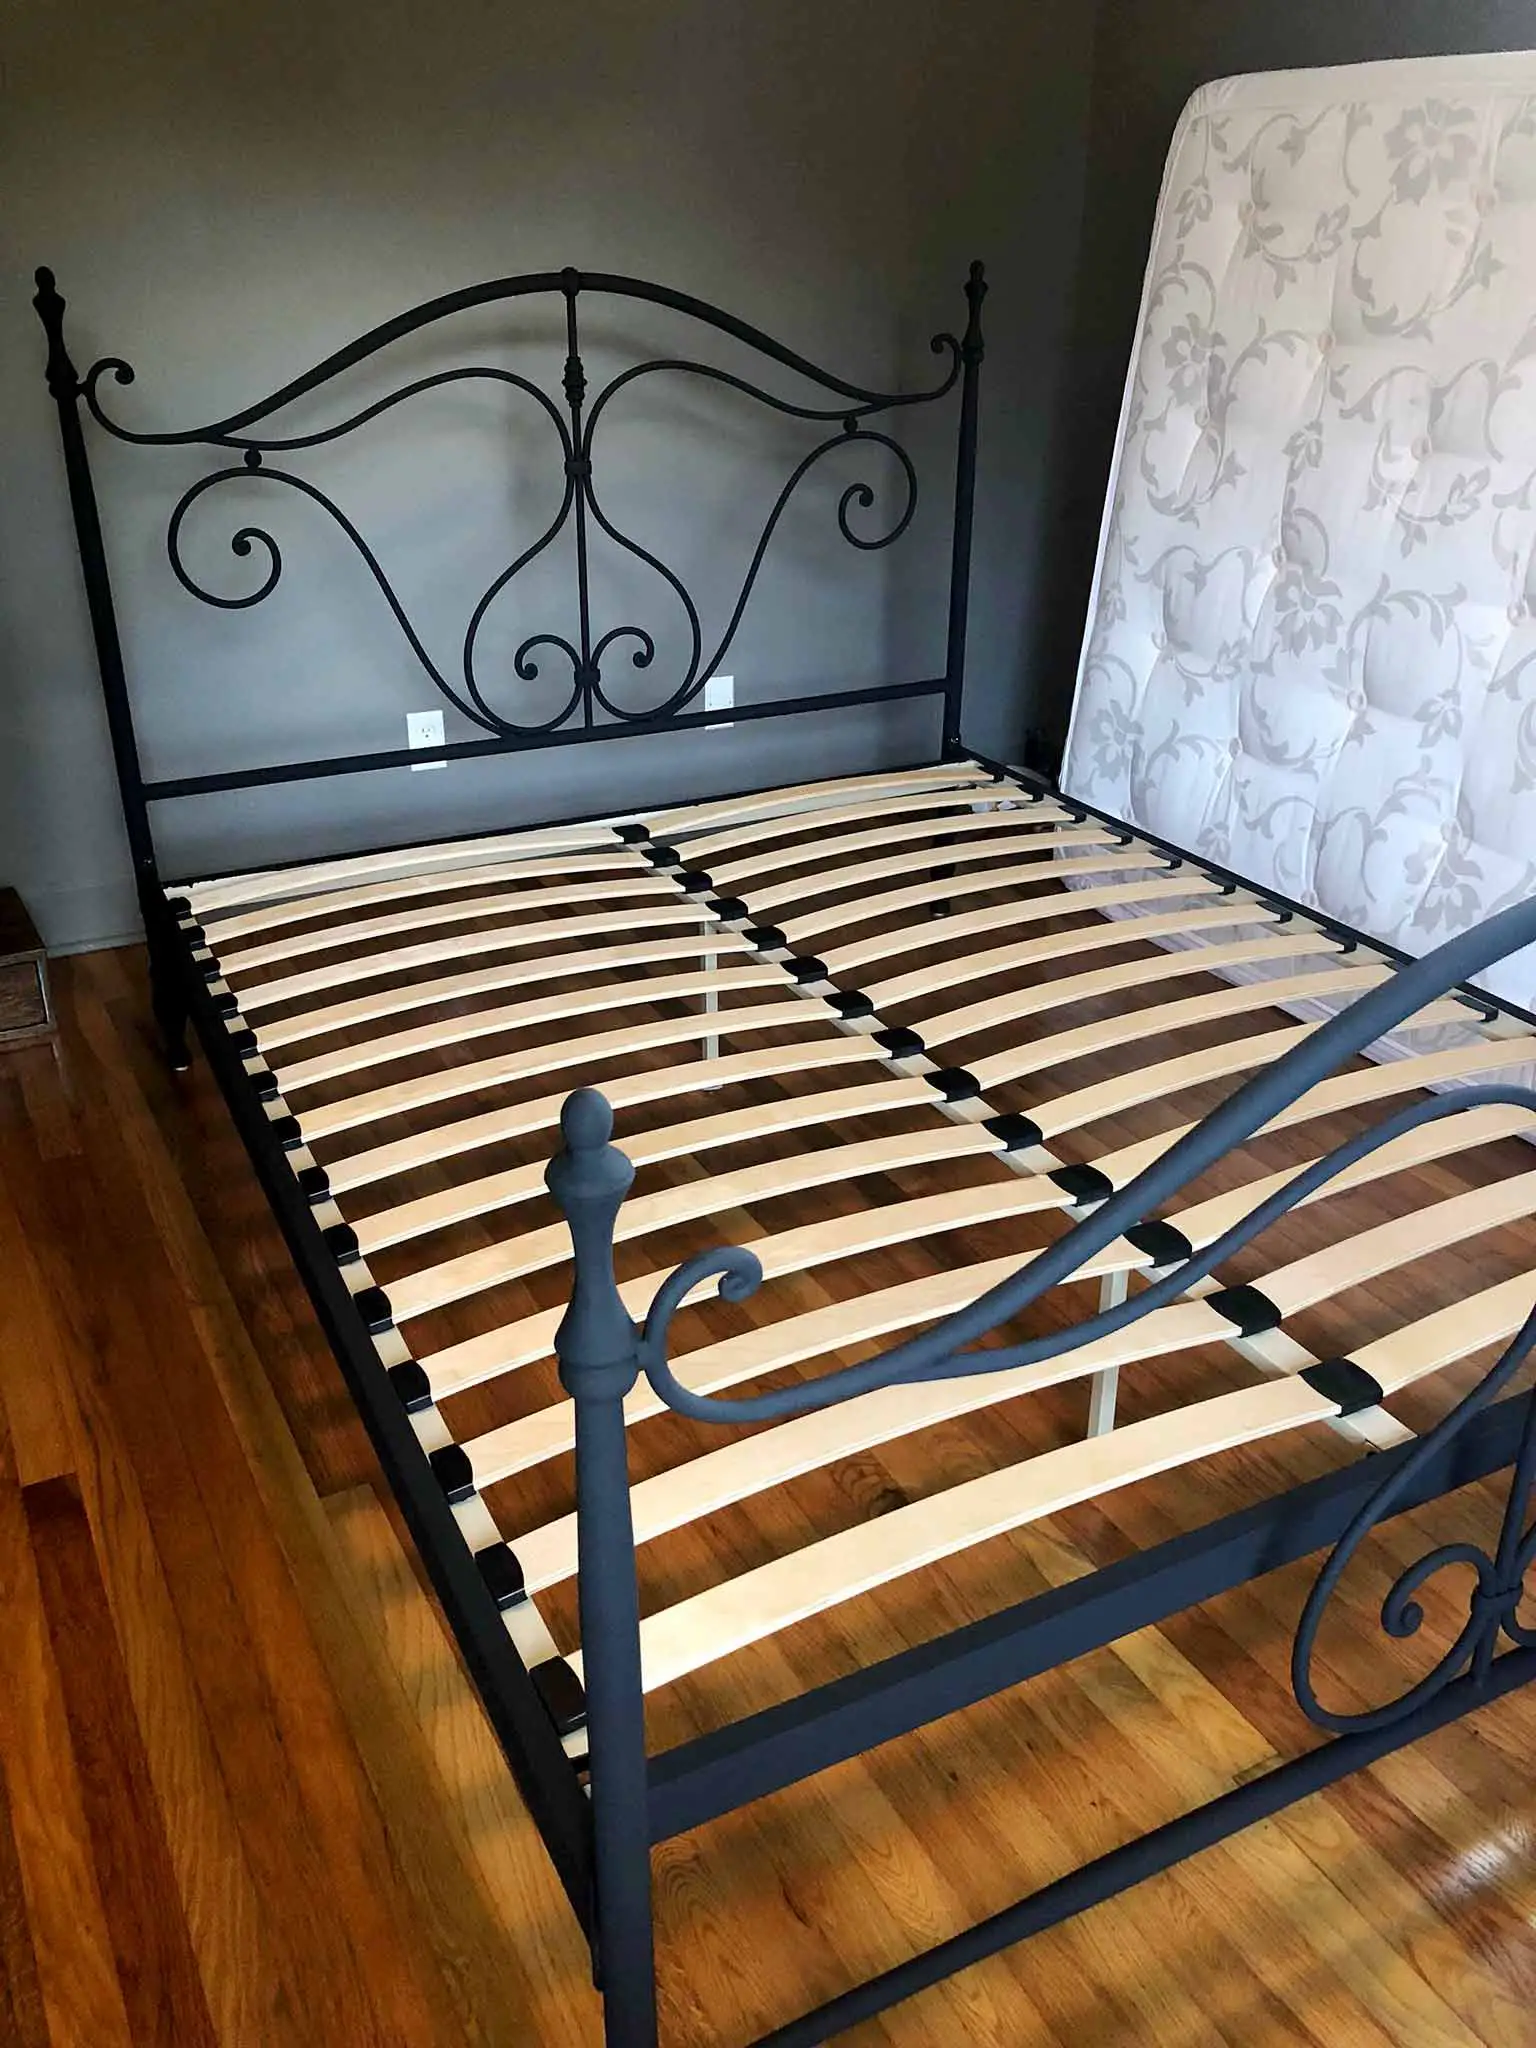 Master Bedroom Progress painting the bed frame with chalk paint - The One Room Challenge - That Homebird Life Blog